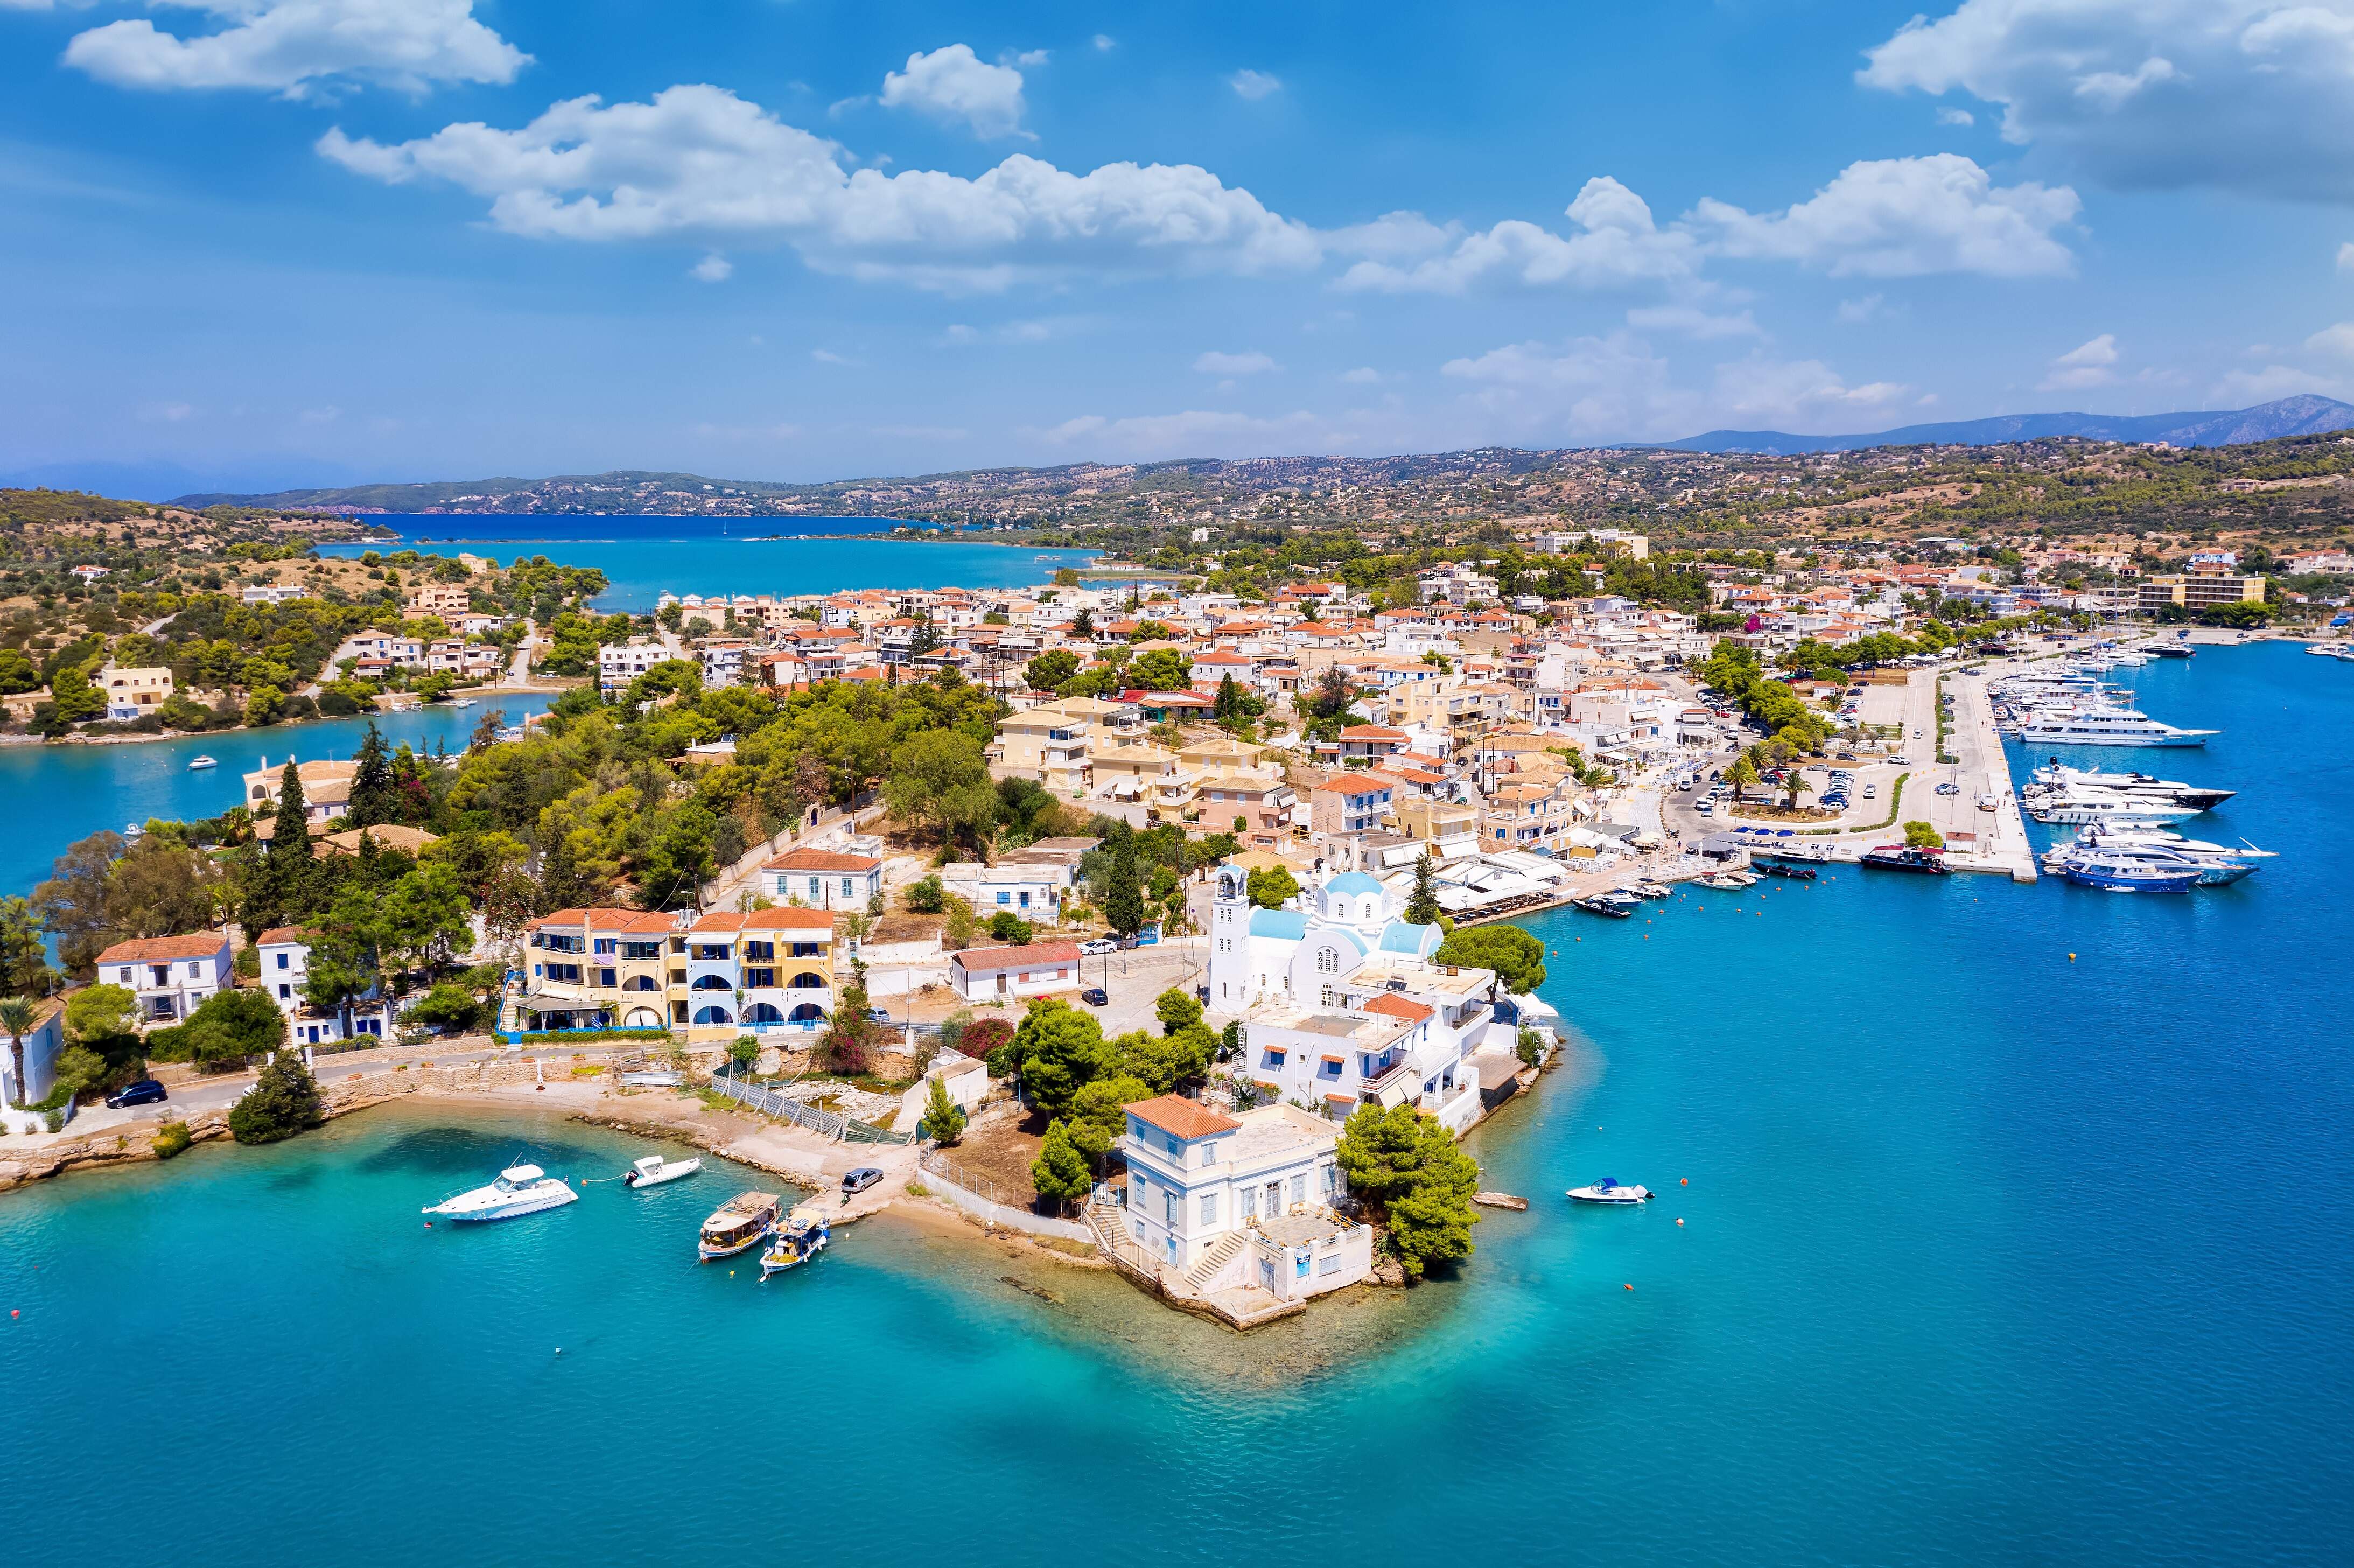 Luxurious And Elegant Hotels For Your Peloponnese Stay